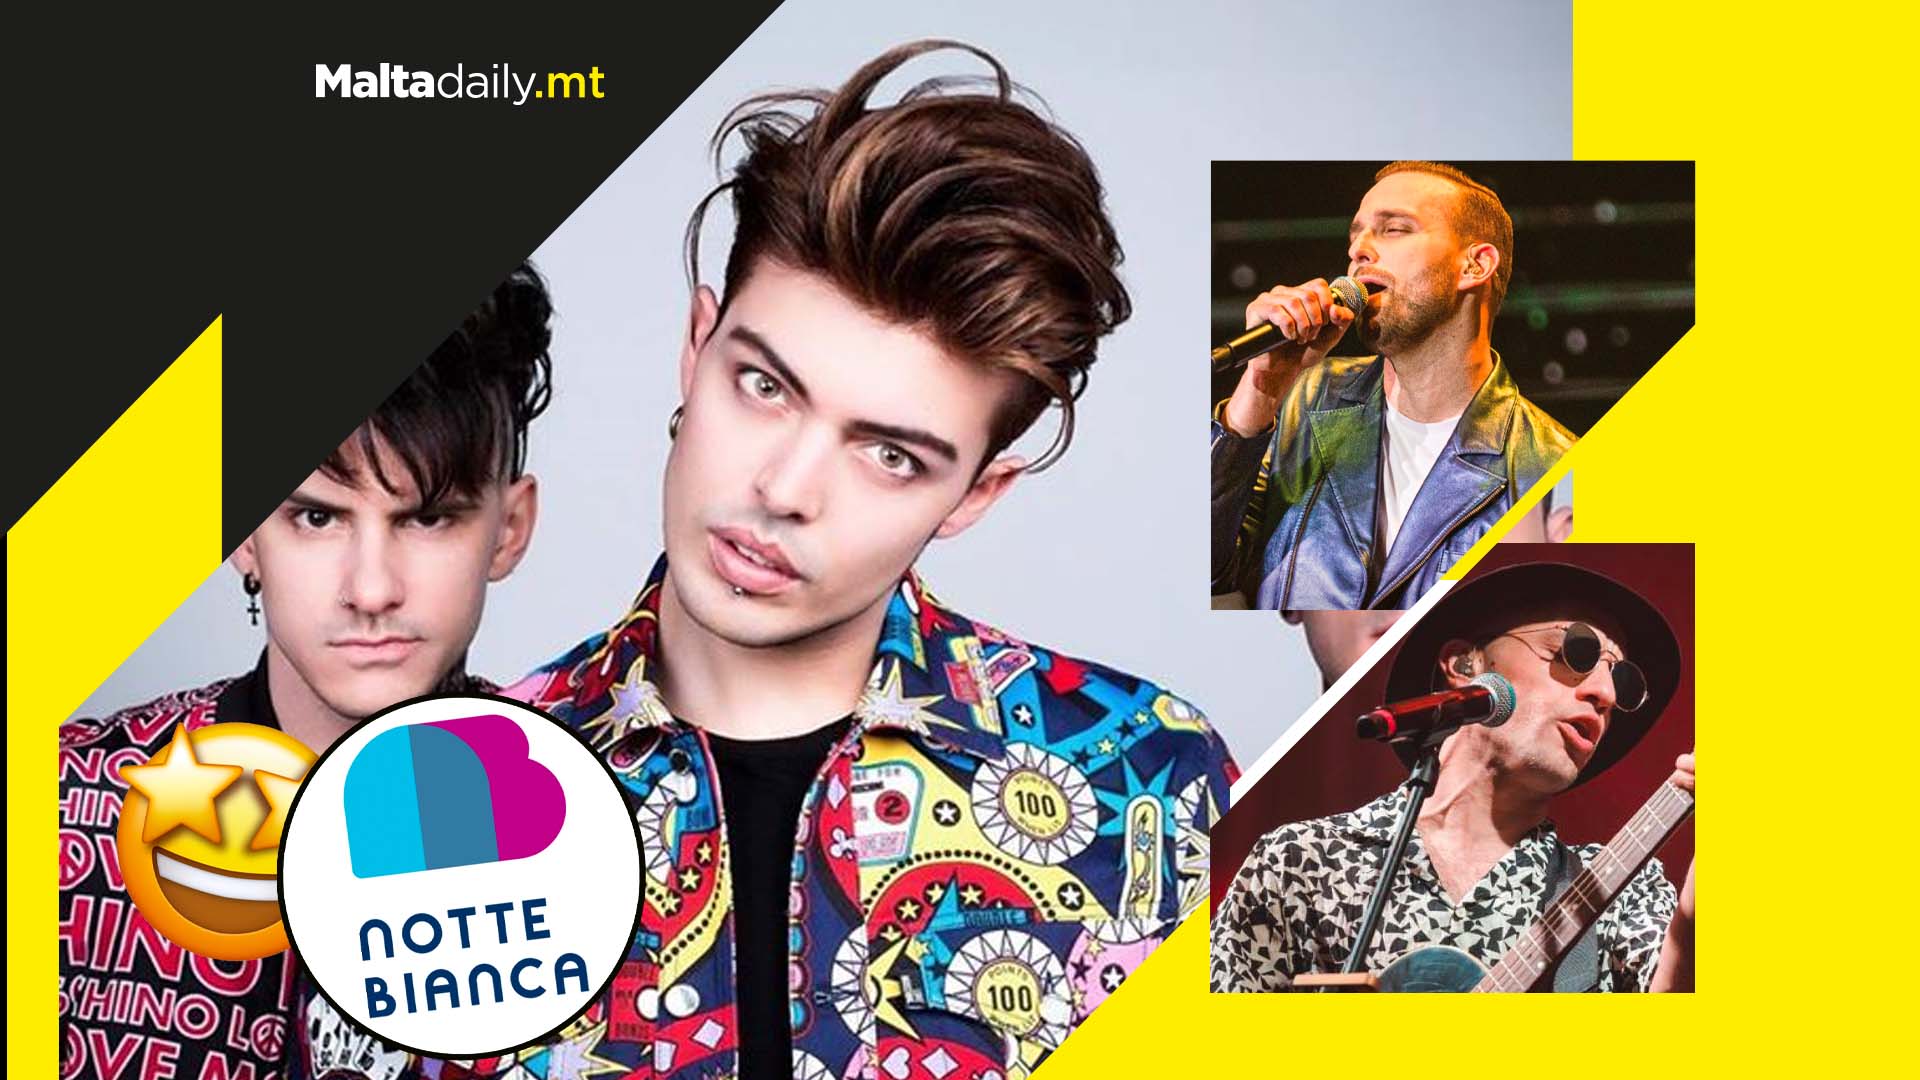 So who will be headlining Notte Bianca 2022?!